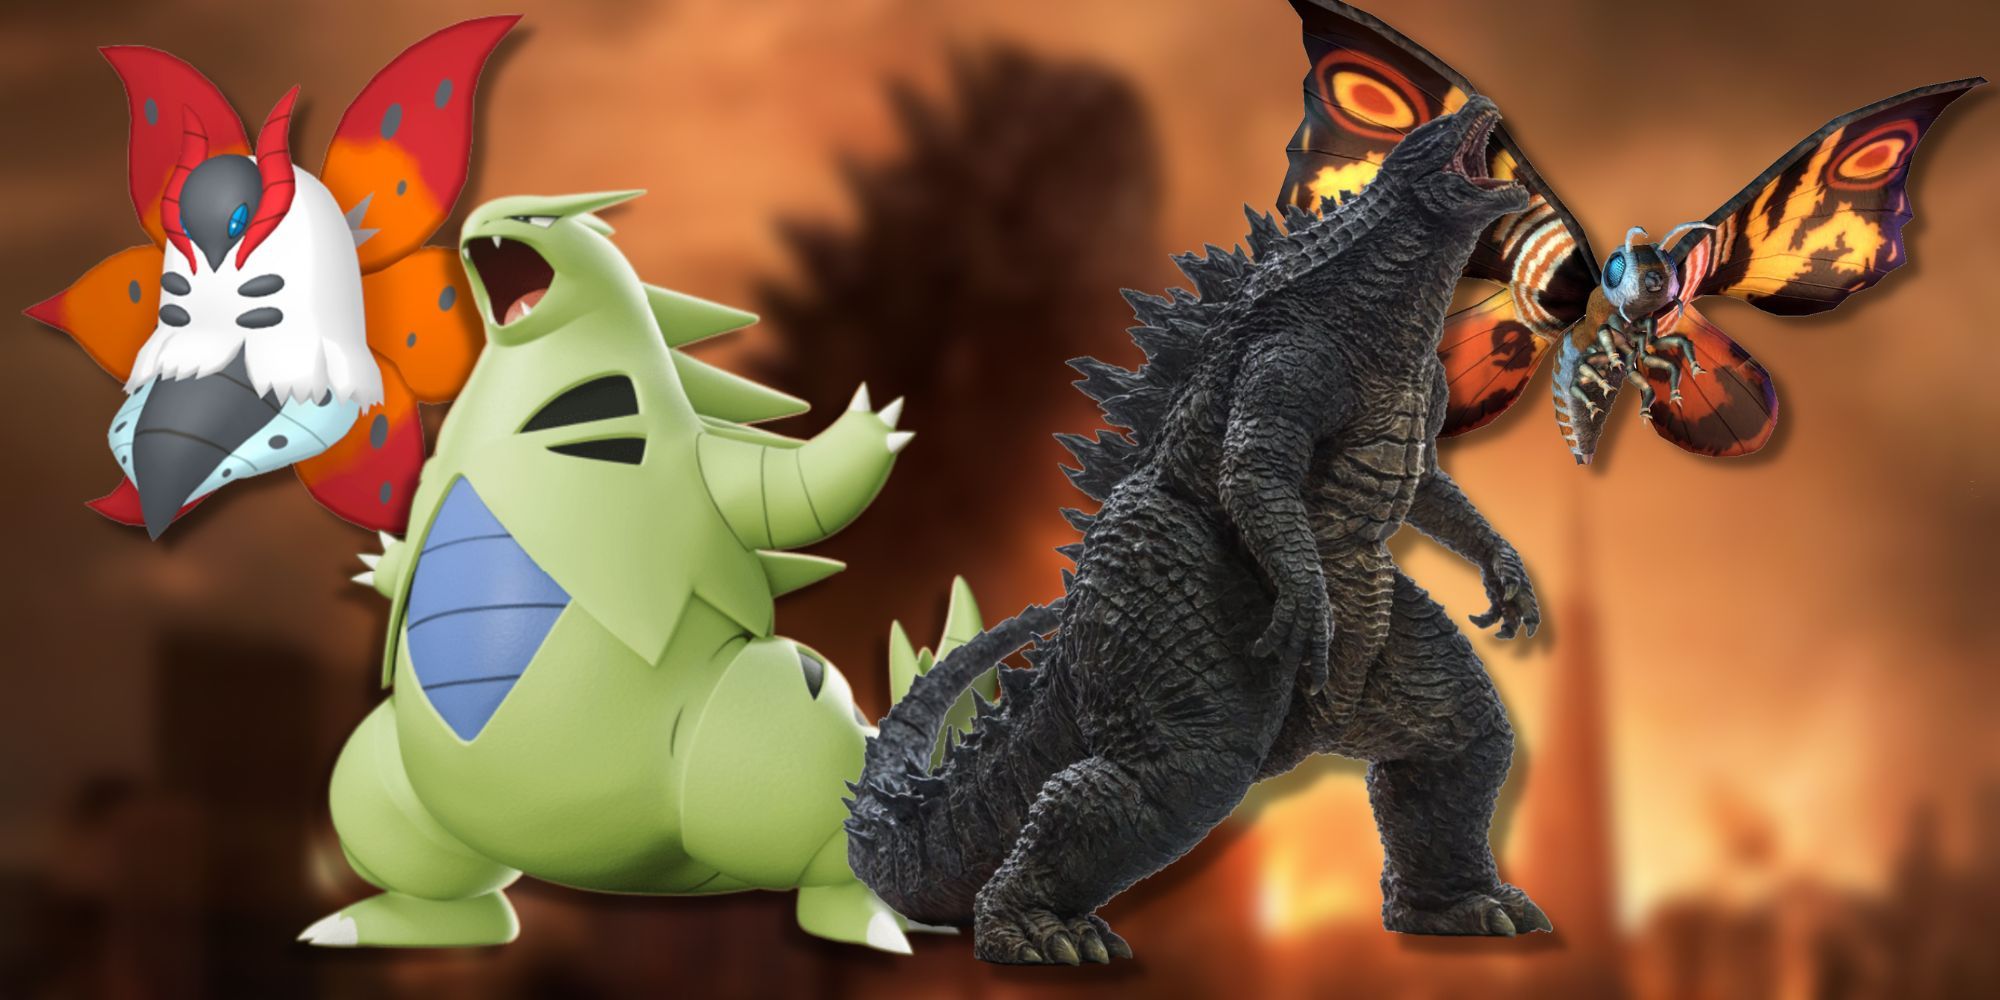 A collage featuring a comparison between Volcarona & Mothra, and Tyranitar & Godzilla